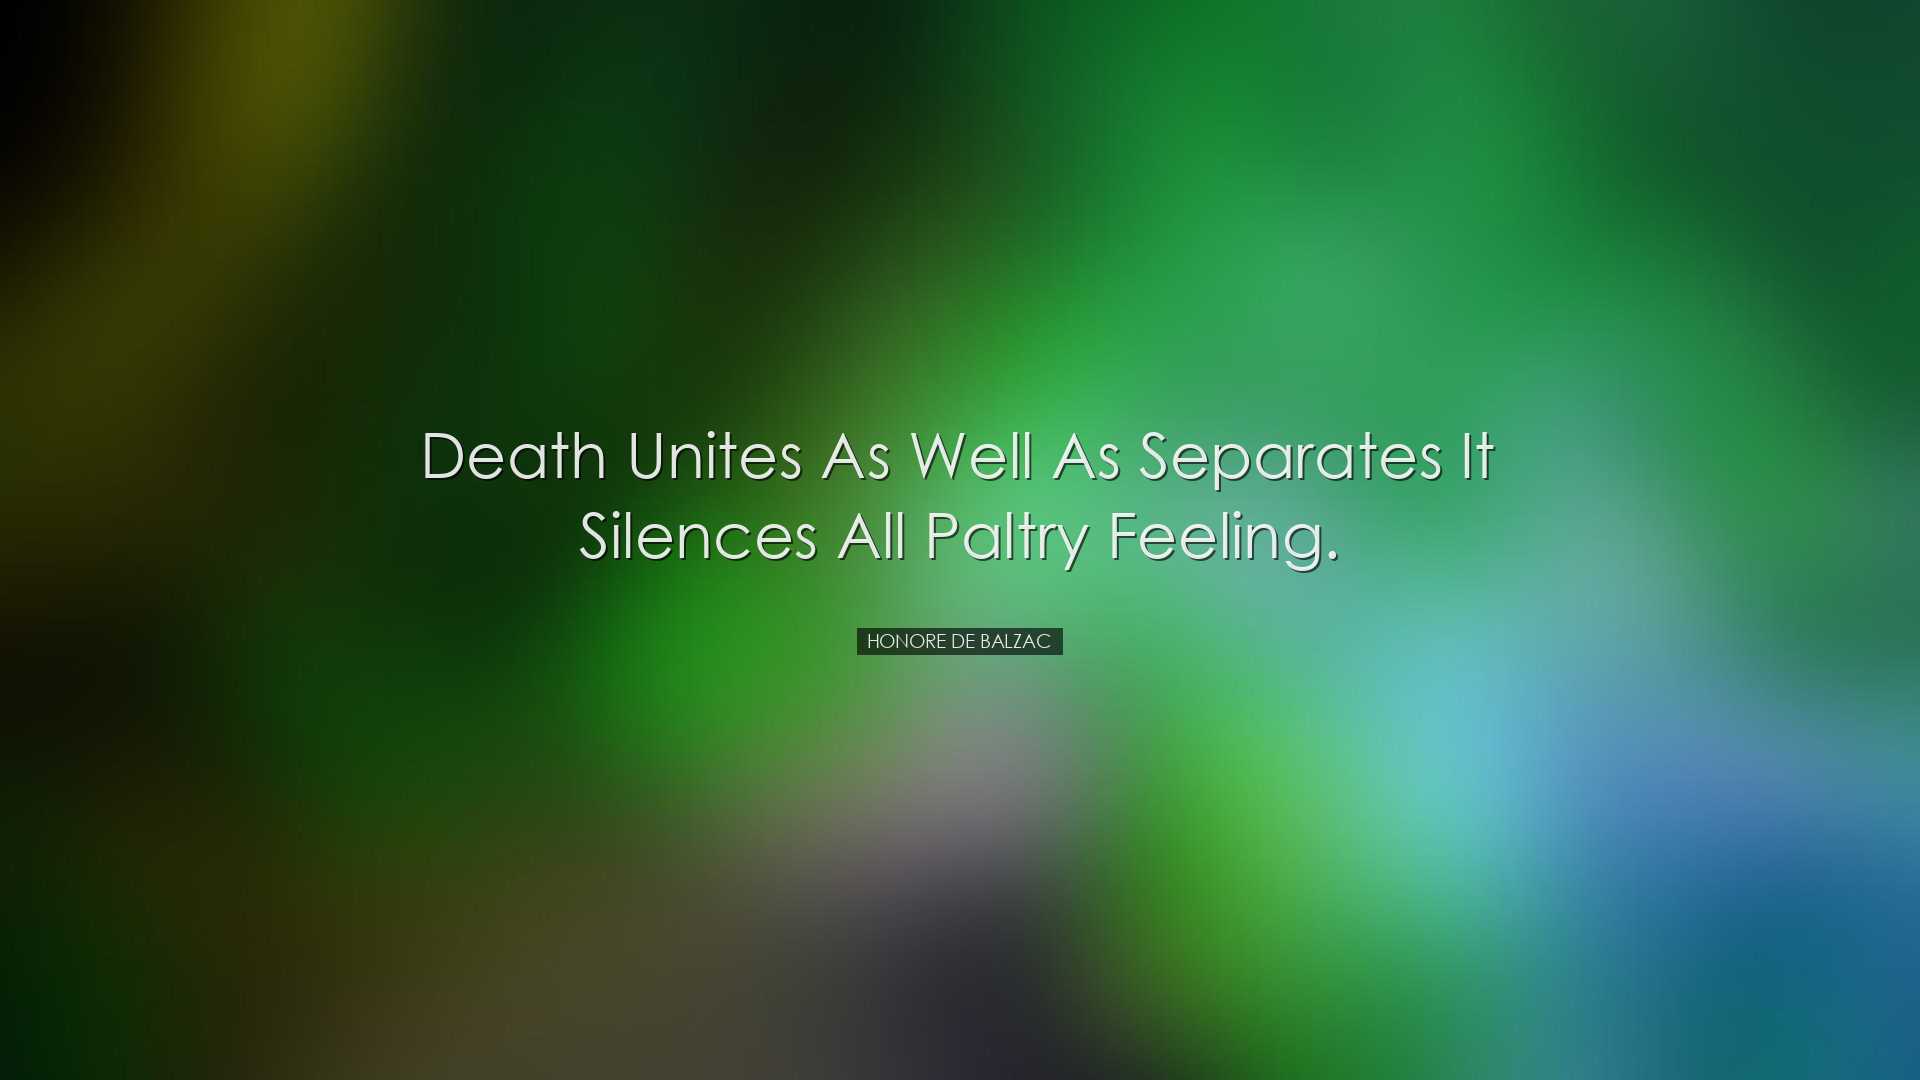 Death unites as well as separates it silences all paltry feeling.